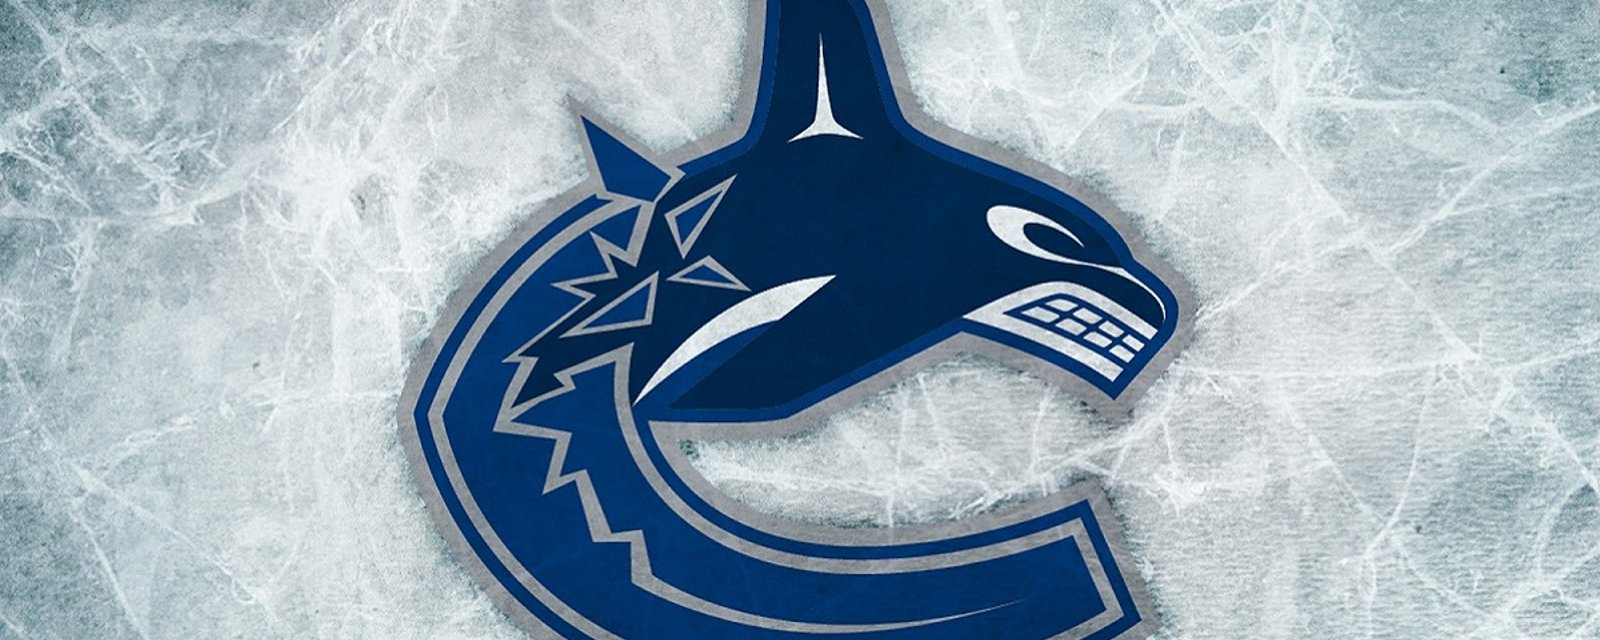 Canucks respond to accusations of 'discrimination' from Rachel Doerrie.